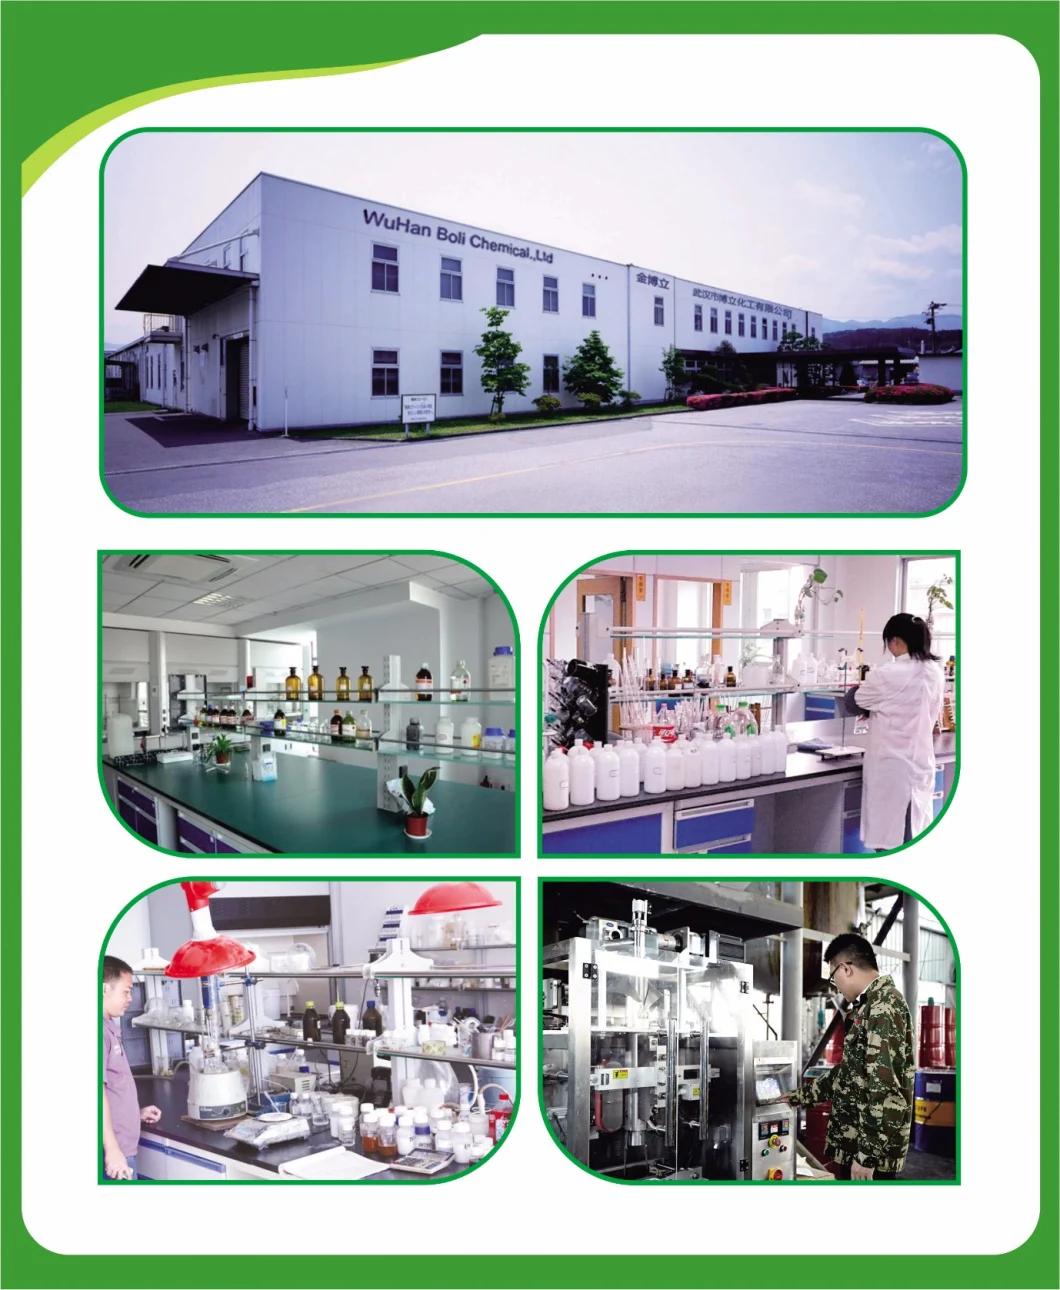 China Factory All-Powerful Adhesive Designed for Furniture Installation and Woodwork